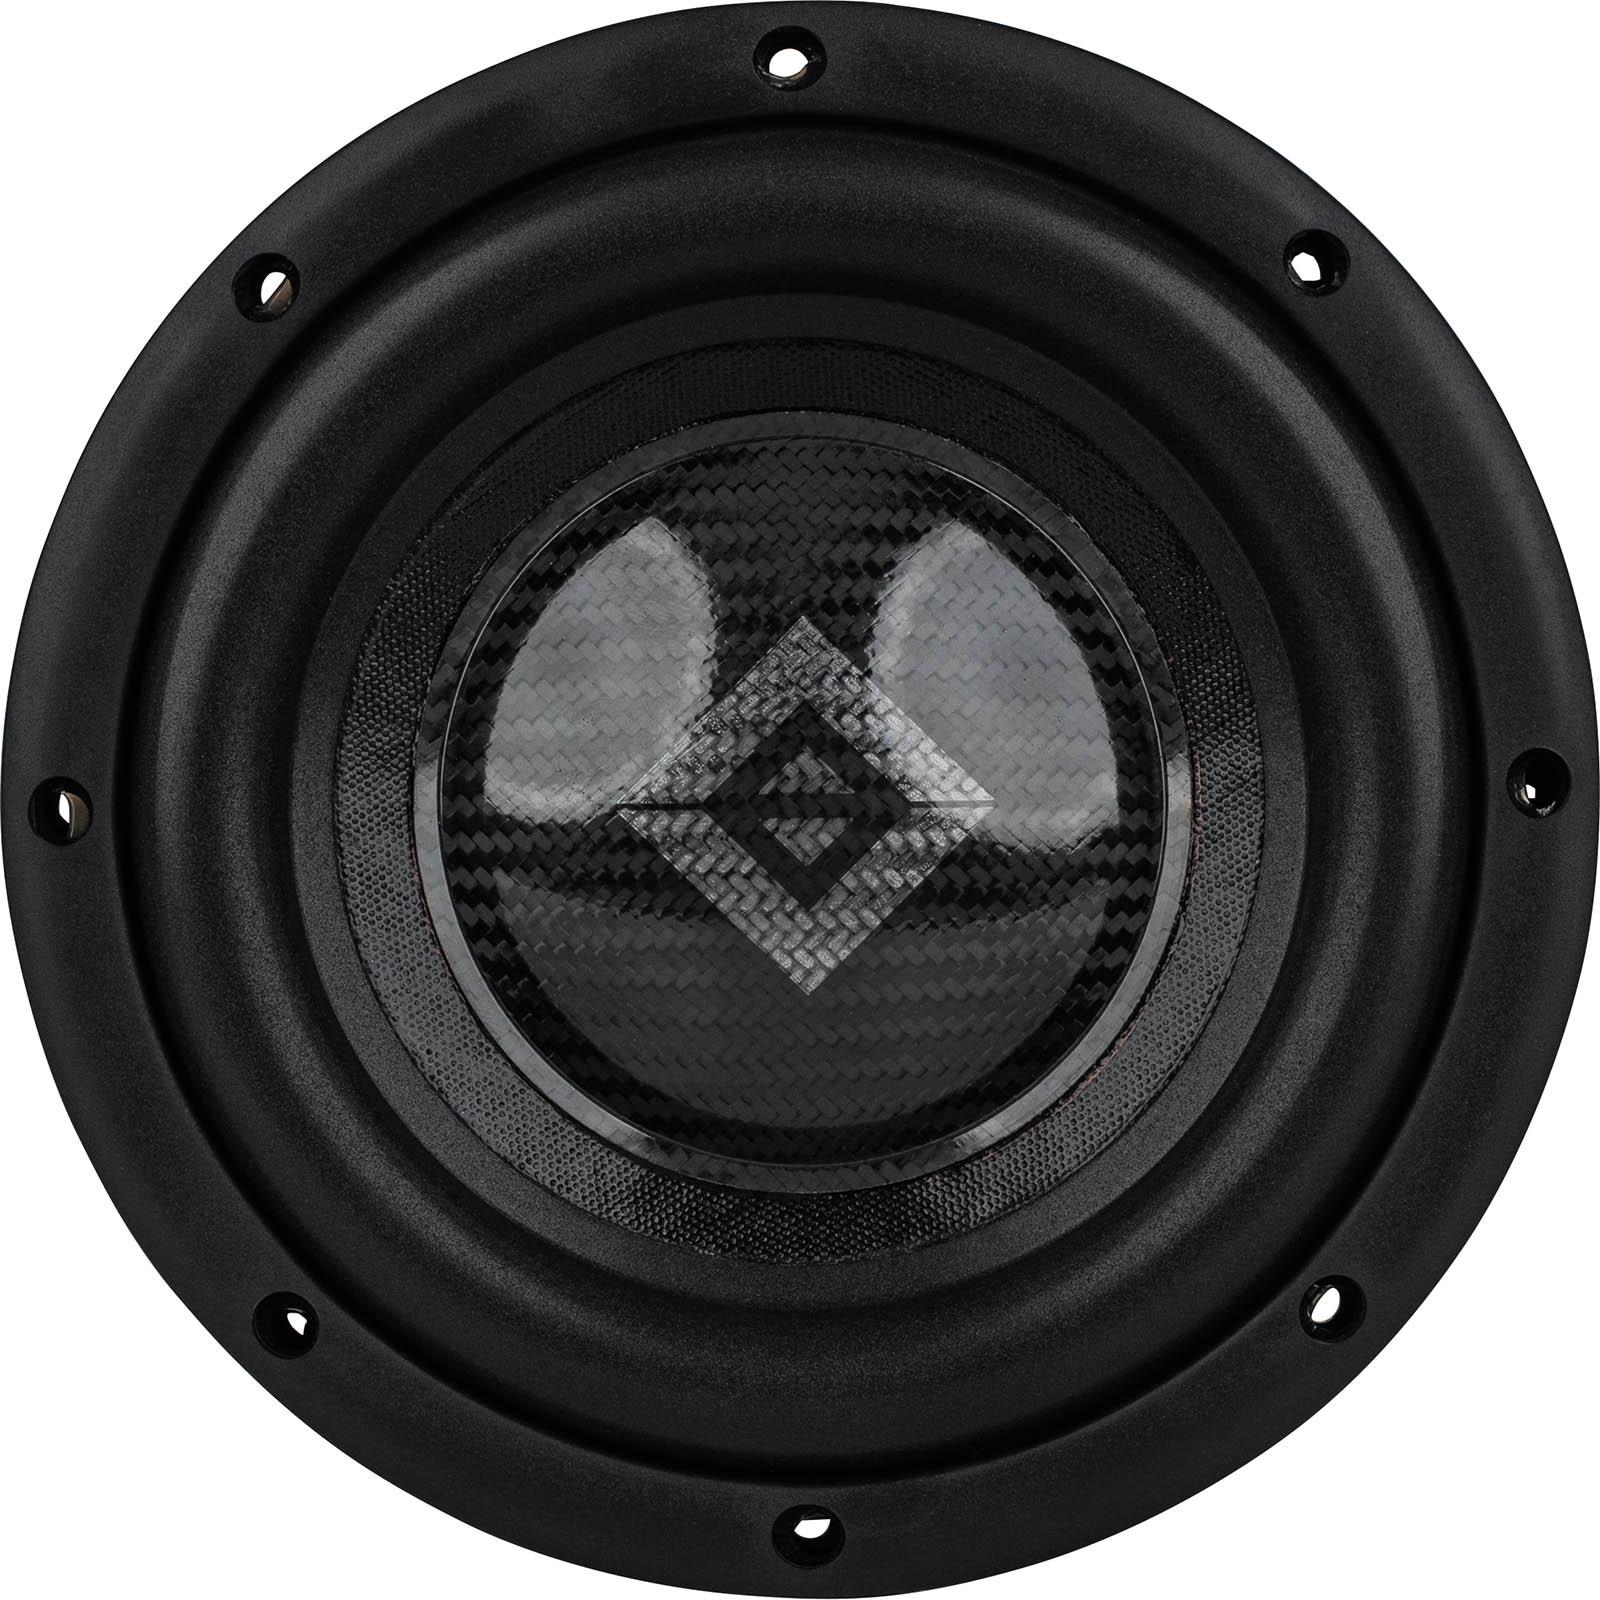 Front view of subwoofer